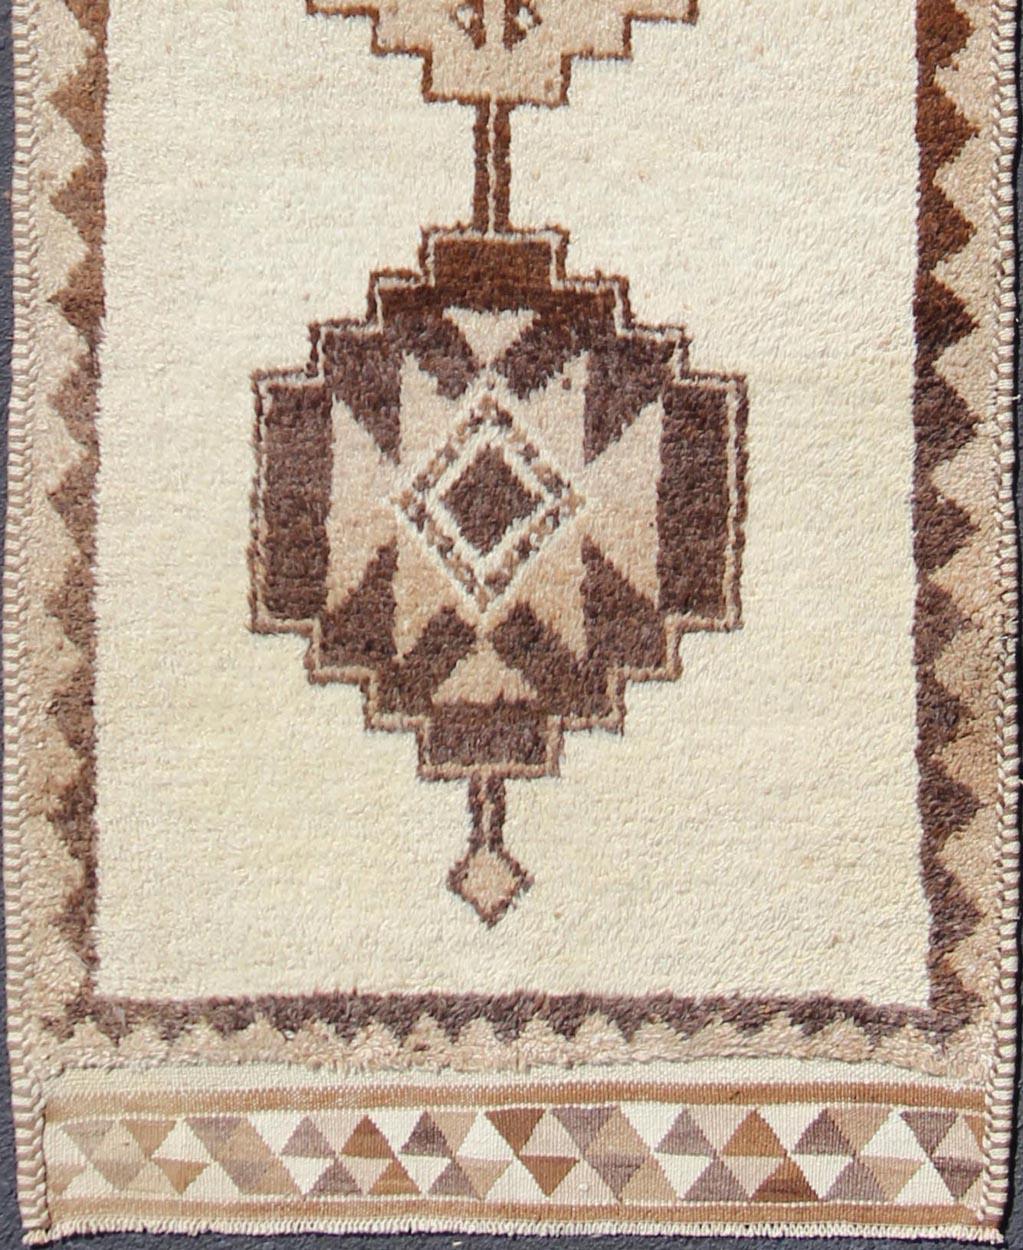 Turkish Tulu vintage runner in earth tones with tribal medallion design, rug en-176285, country of origin / type: turkey / Tulu, circa 1960

This unique Turkish Tulu runner features a vertical design of tribal motifs set atop a cream-colored